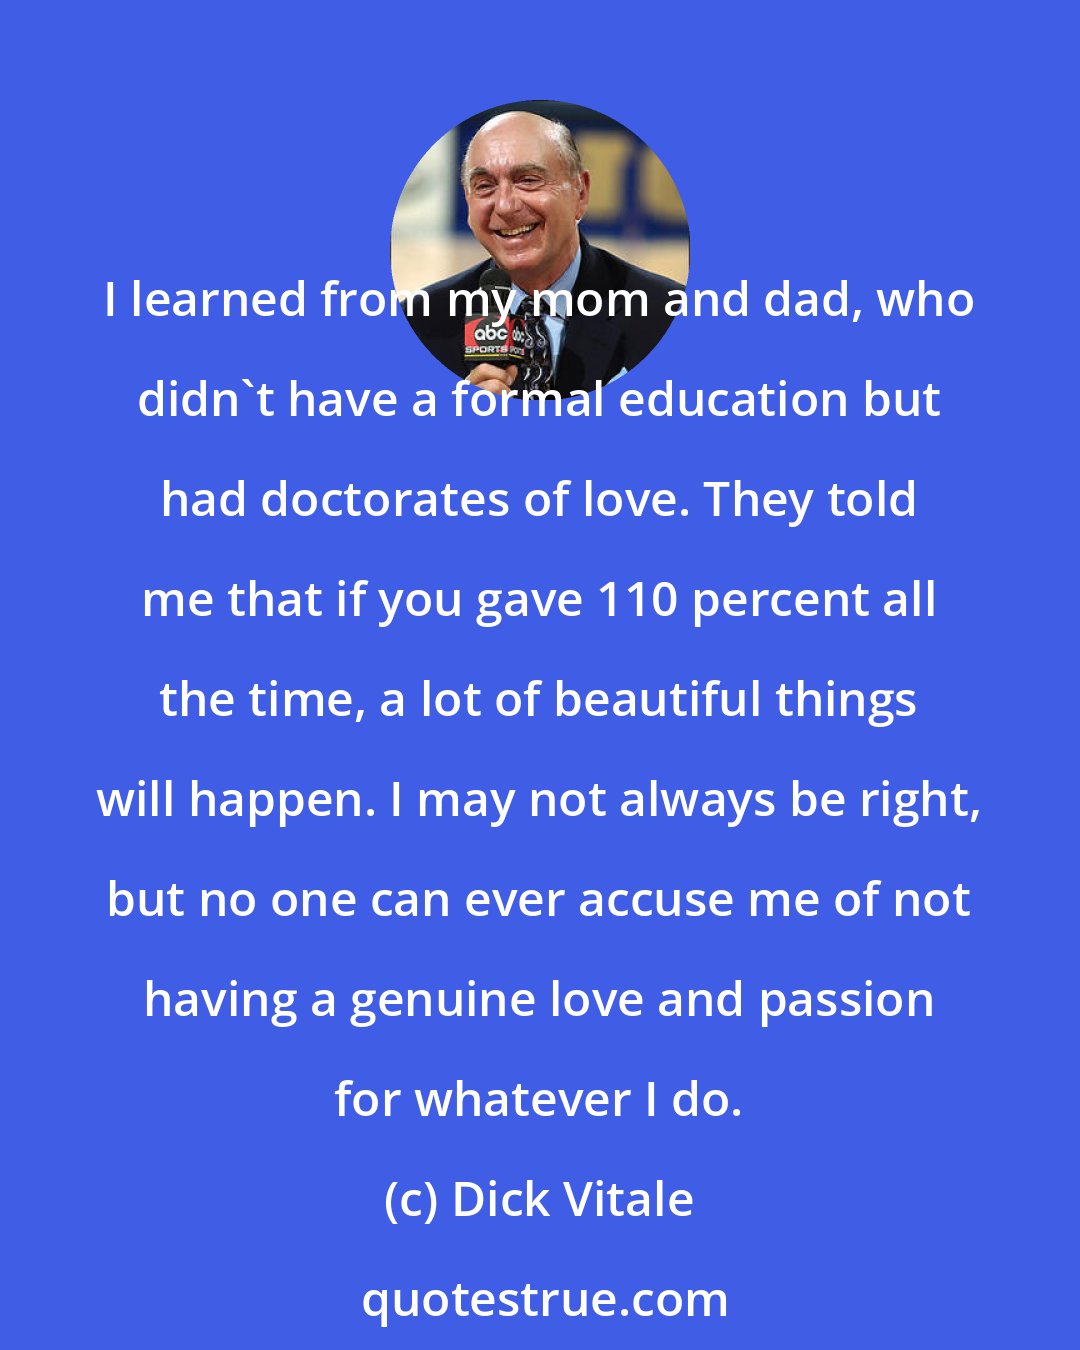 Dick Vitale: I learned from my mom and dad, who didn't have a formal education but had doctorates of love. They told me that if you gave 110 percent all the time, a lot of beautiful things will happen. I may not always be right, but no one can ever accuse me of not having a genuine love and passion for whatever I do.